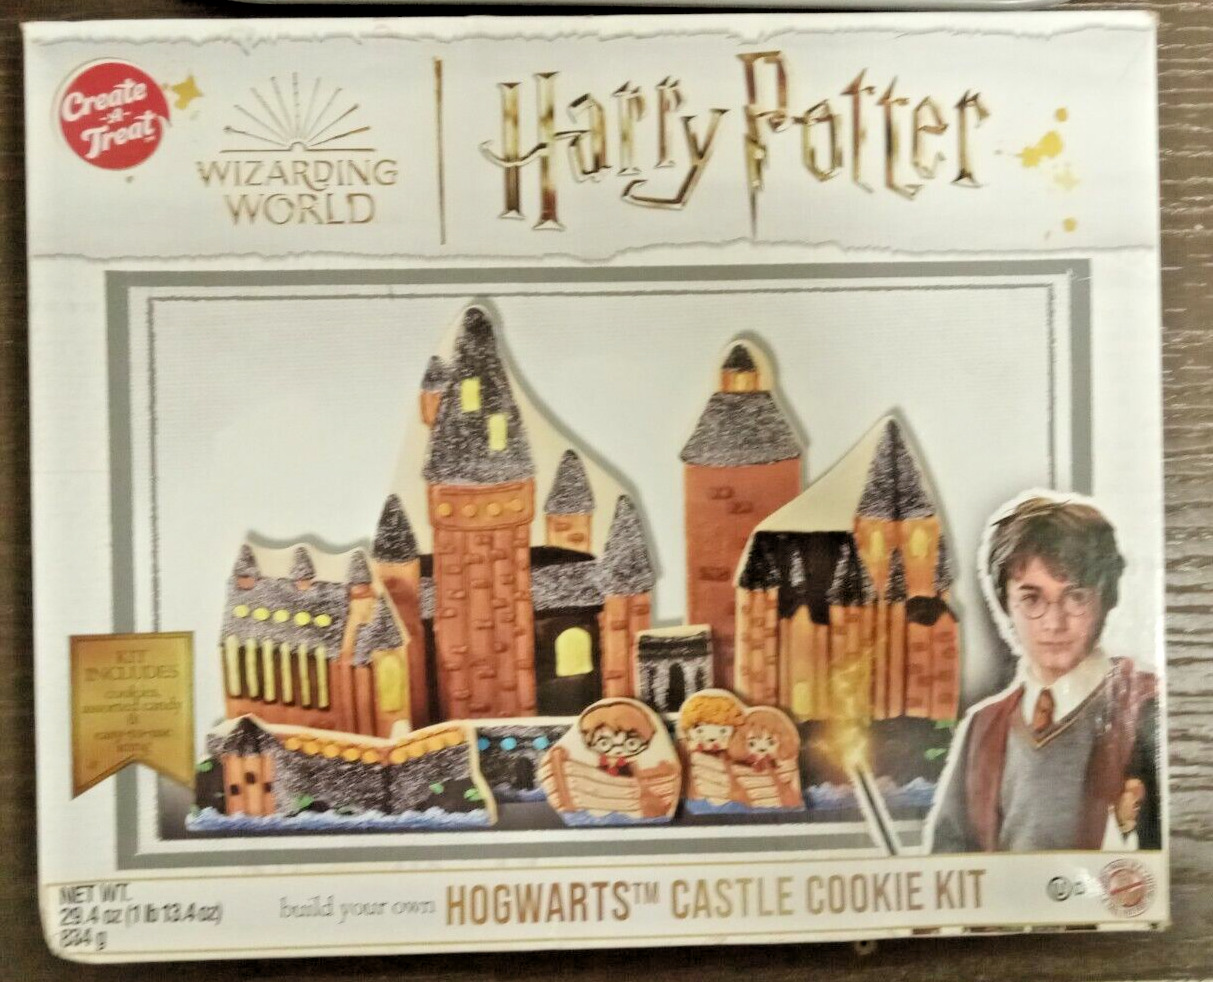 Create-A-Treat Wizarding World Harry Potty Build your own Hogwarts Castle Cookie